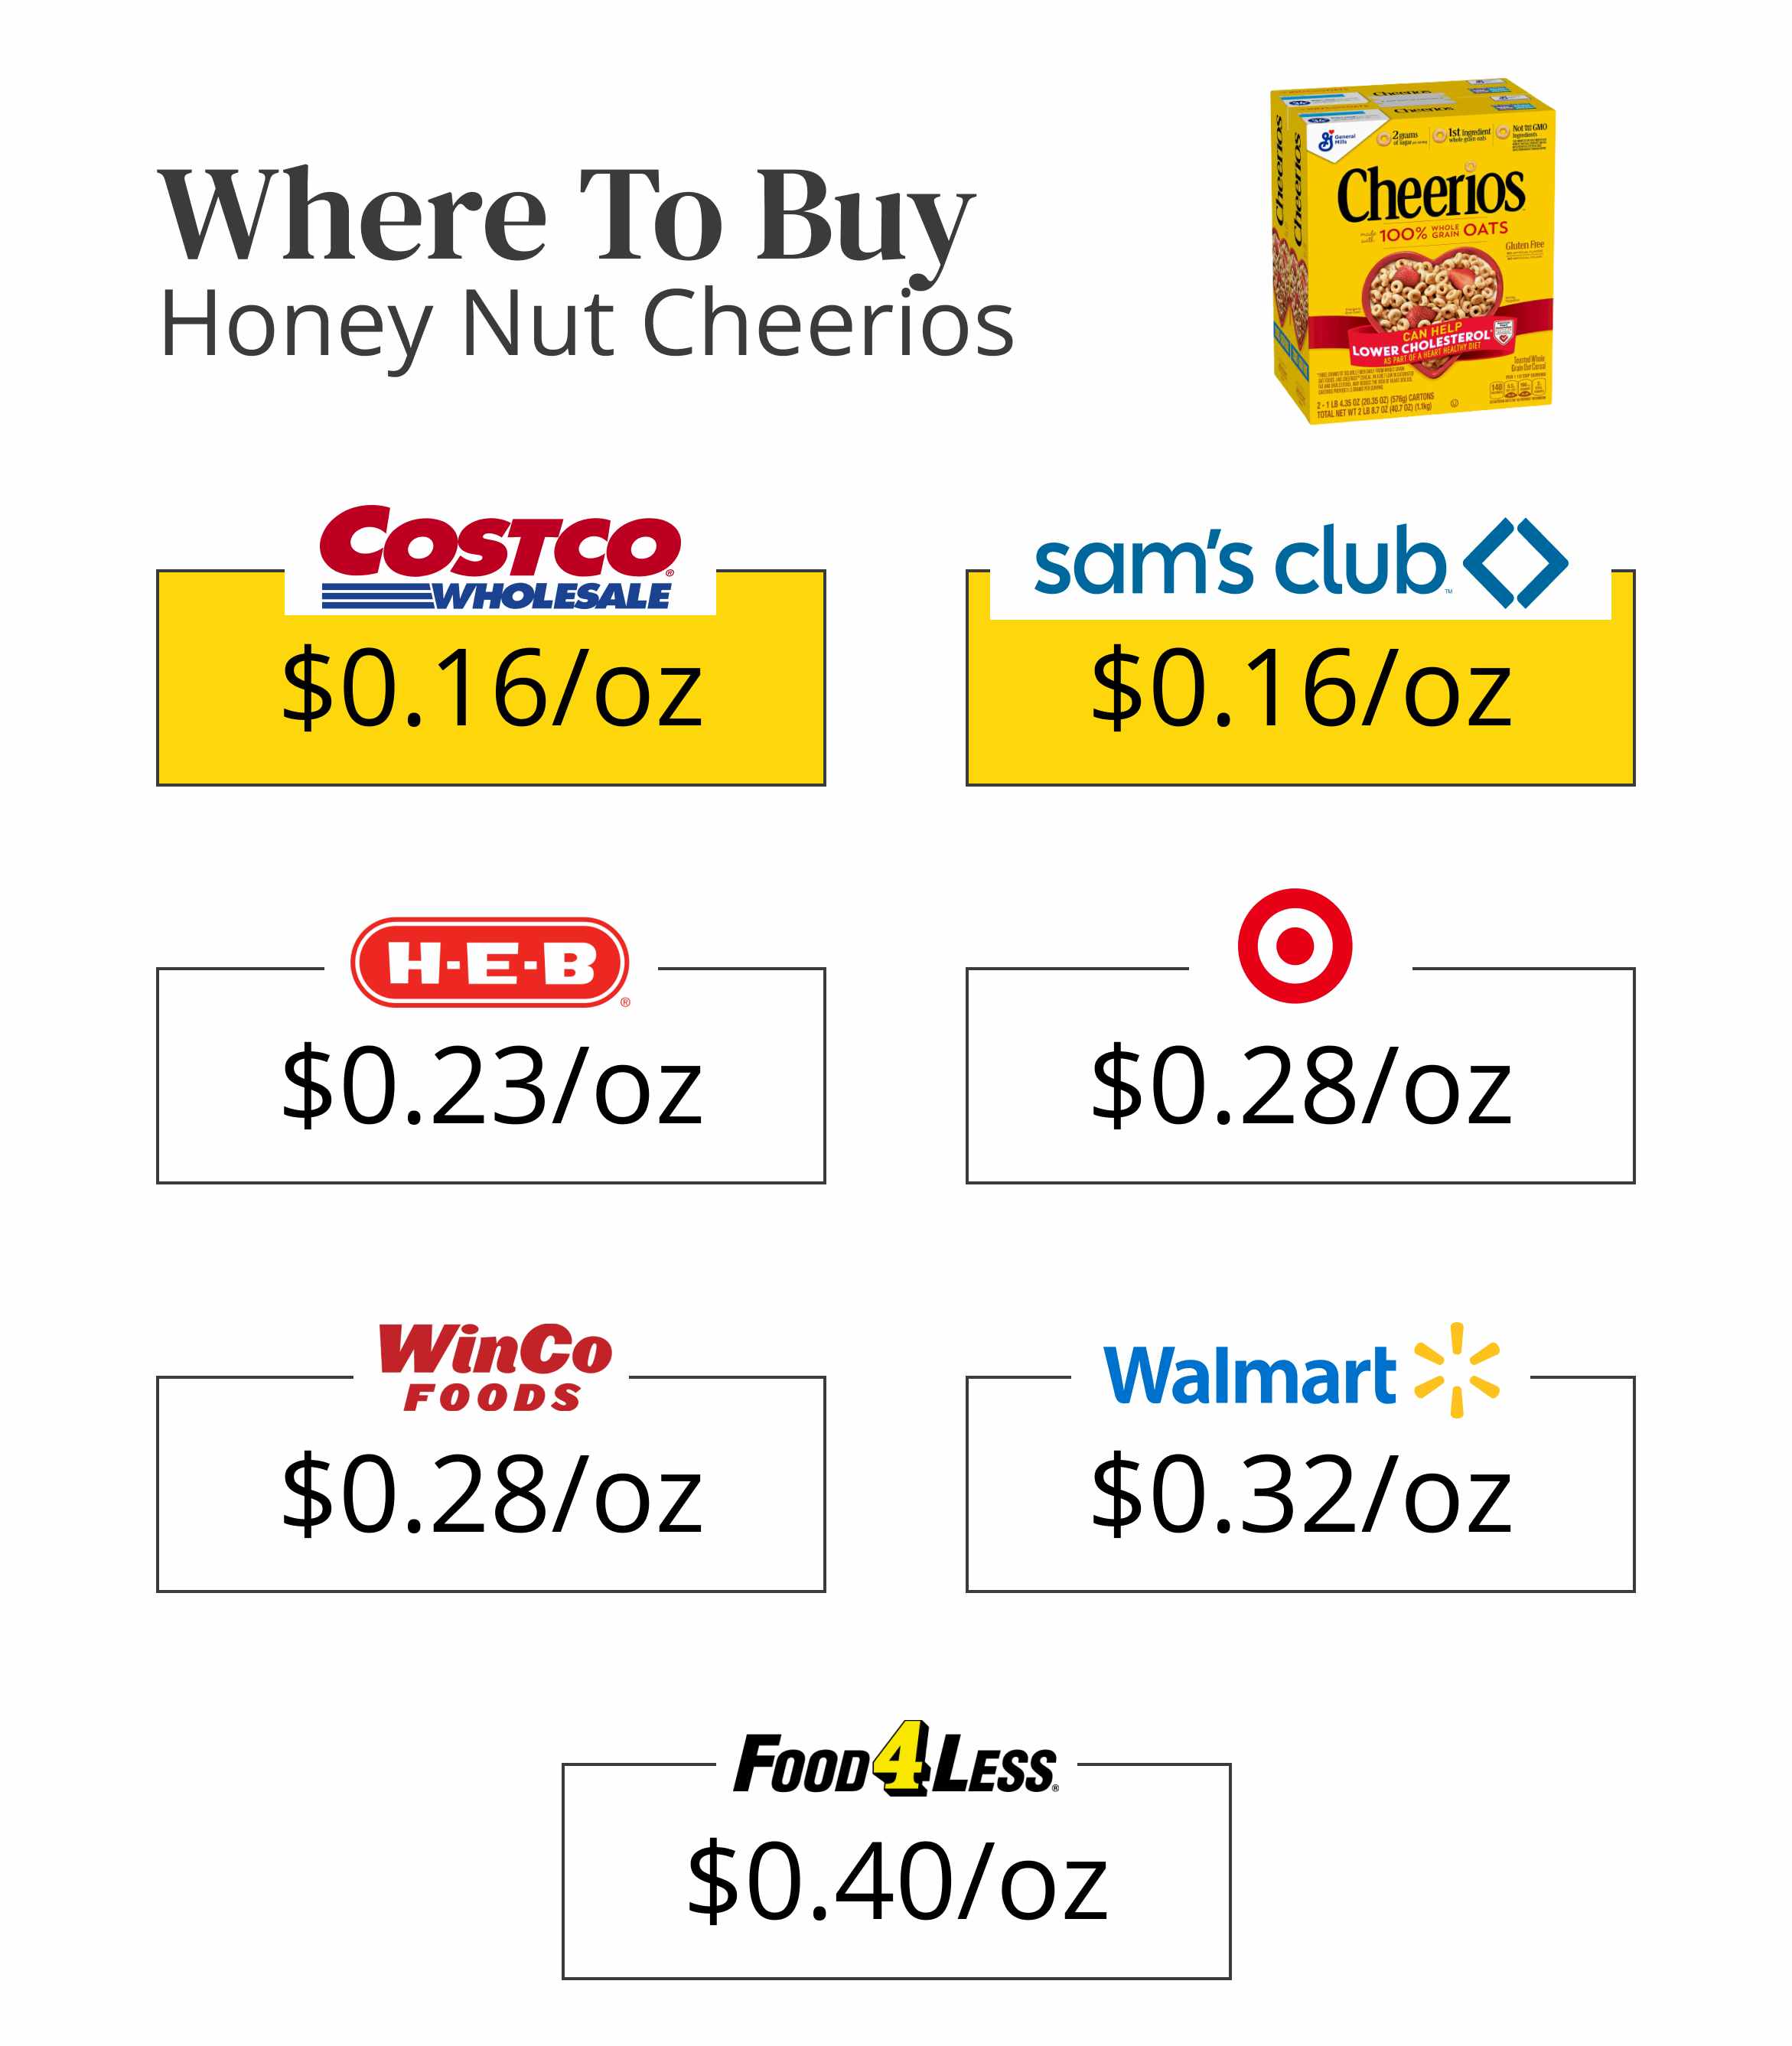 Low-price wholesale grocery deals